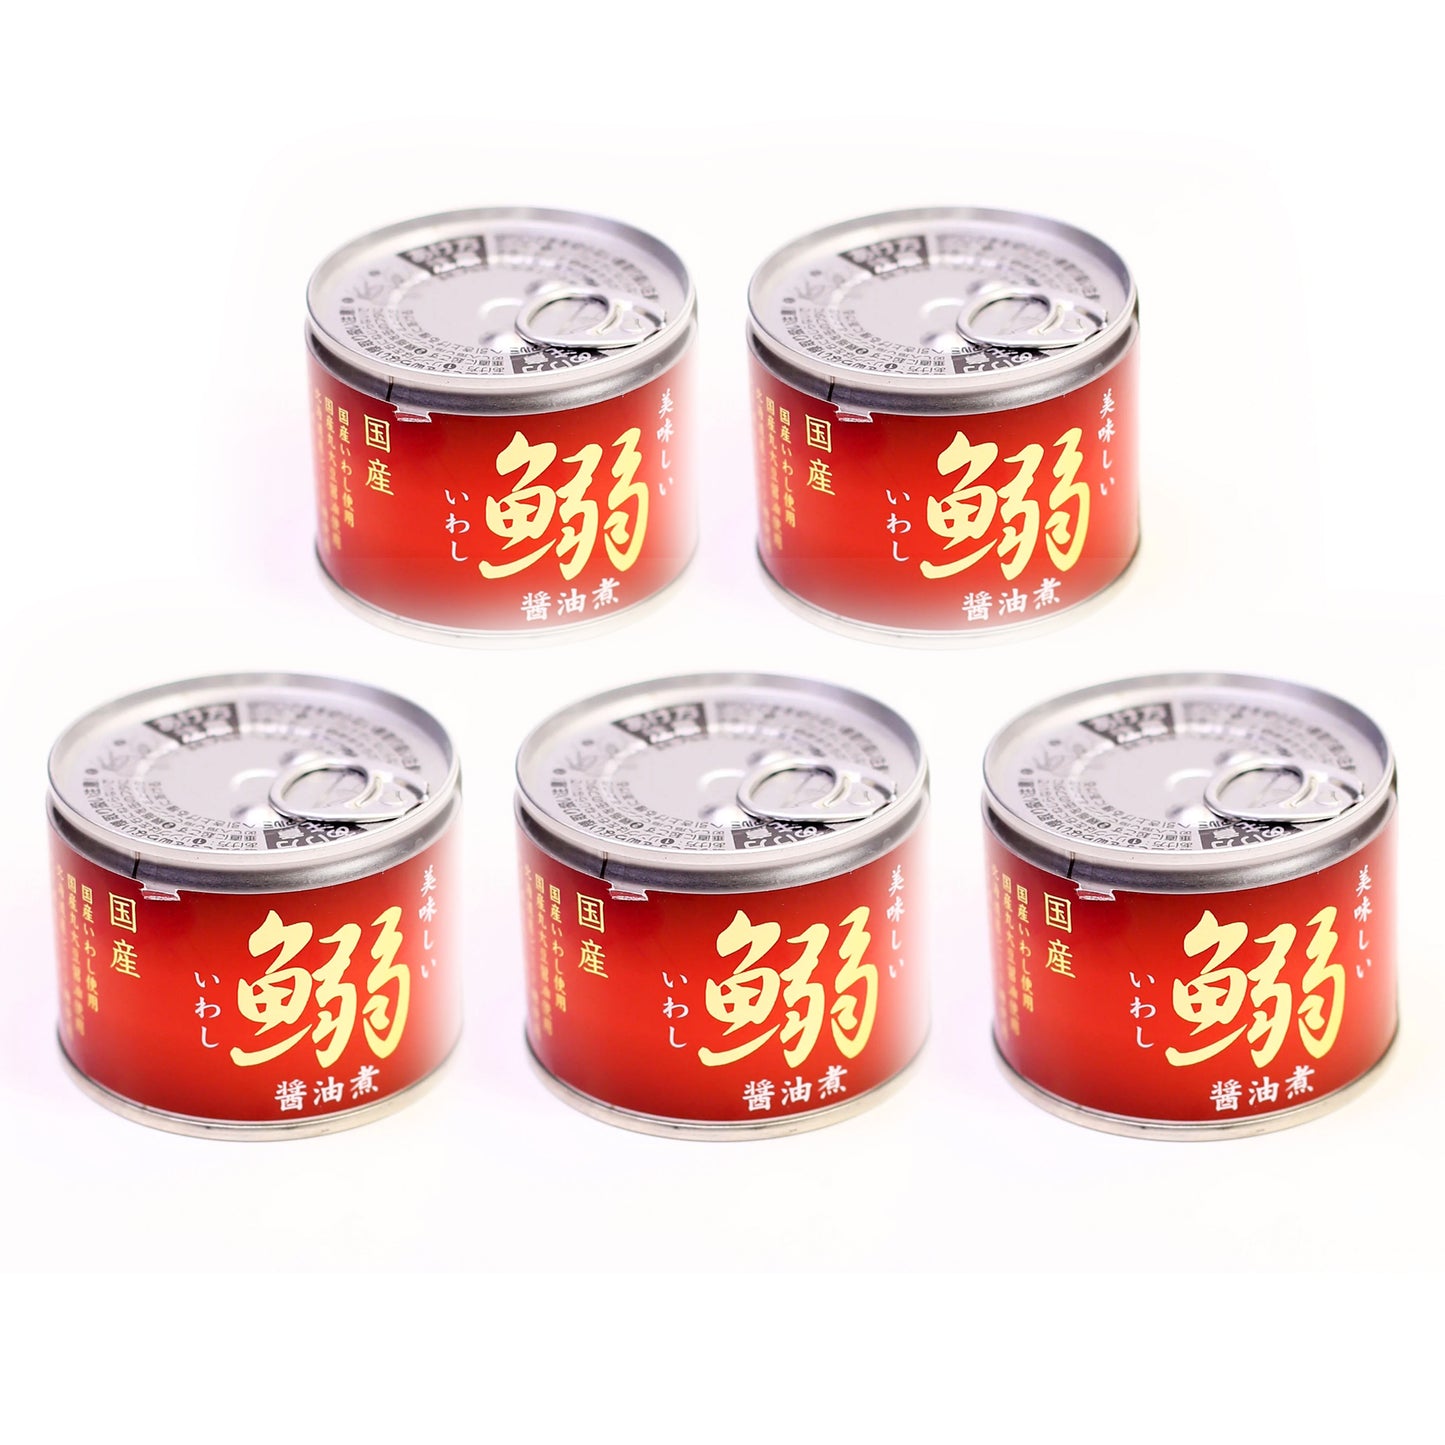 Simmered Sardines in Soy Sauce, 6.7 Ounce Can (Pack of 5)